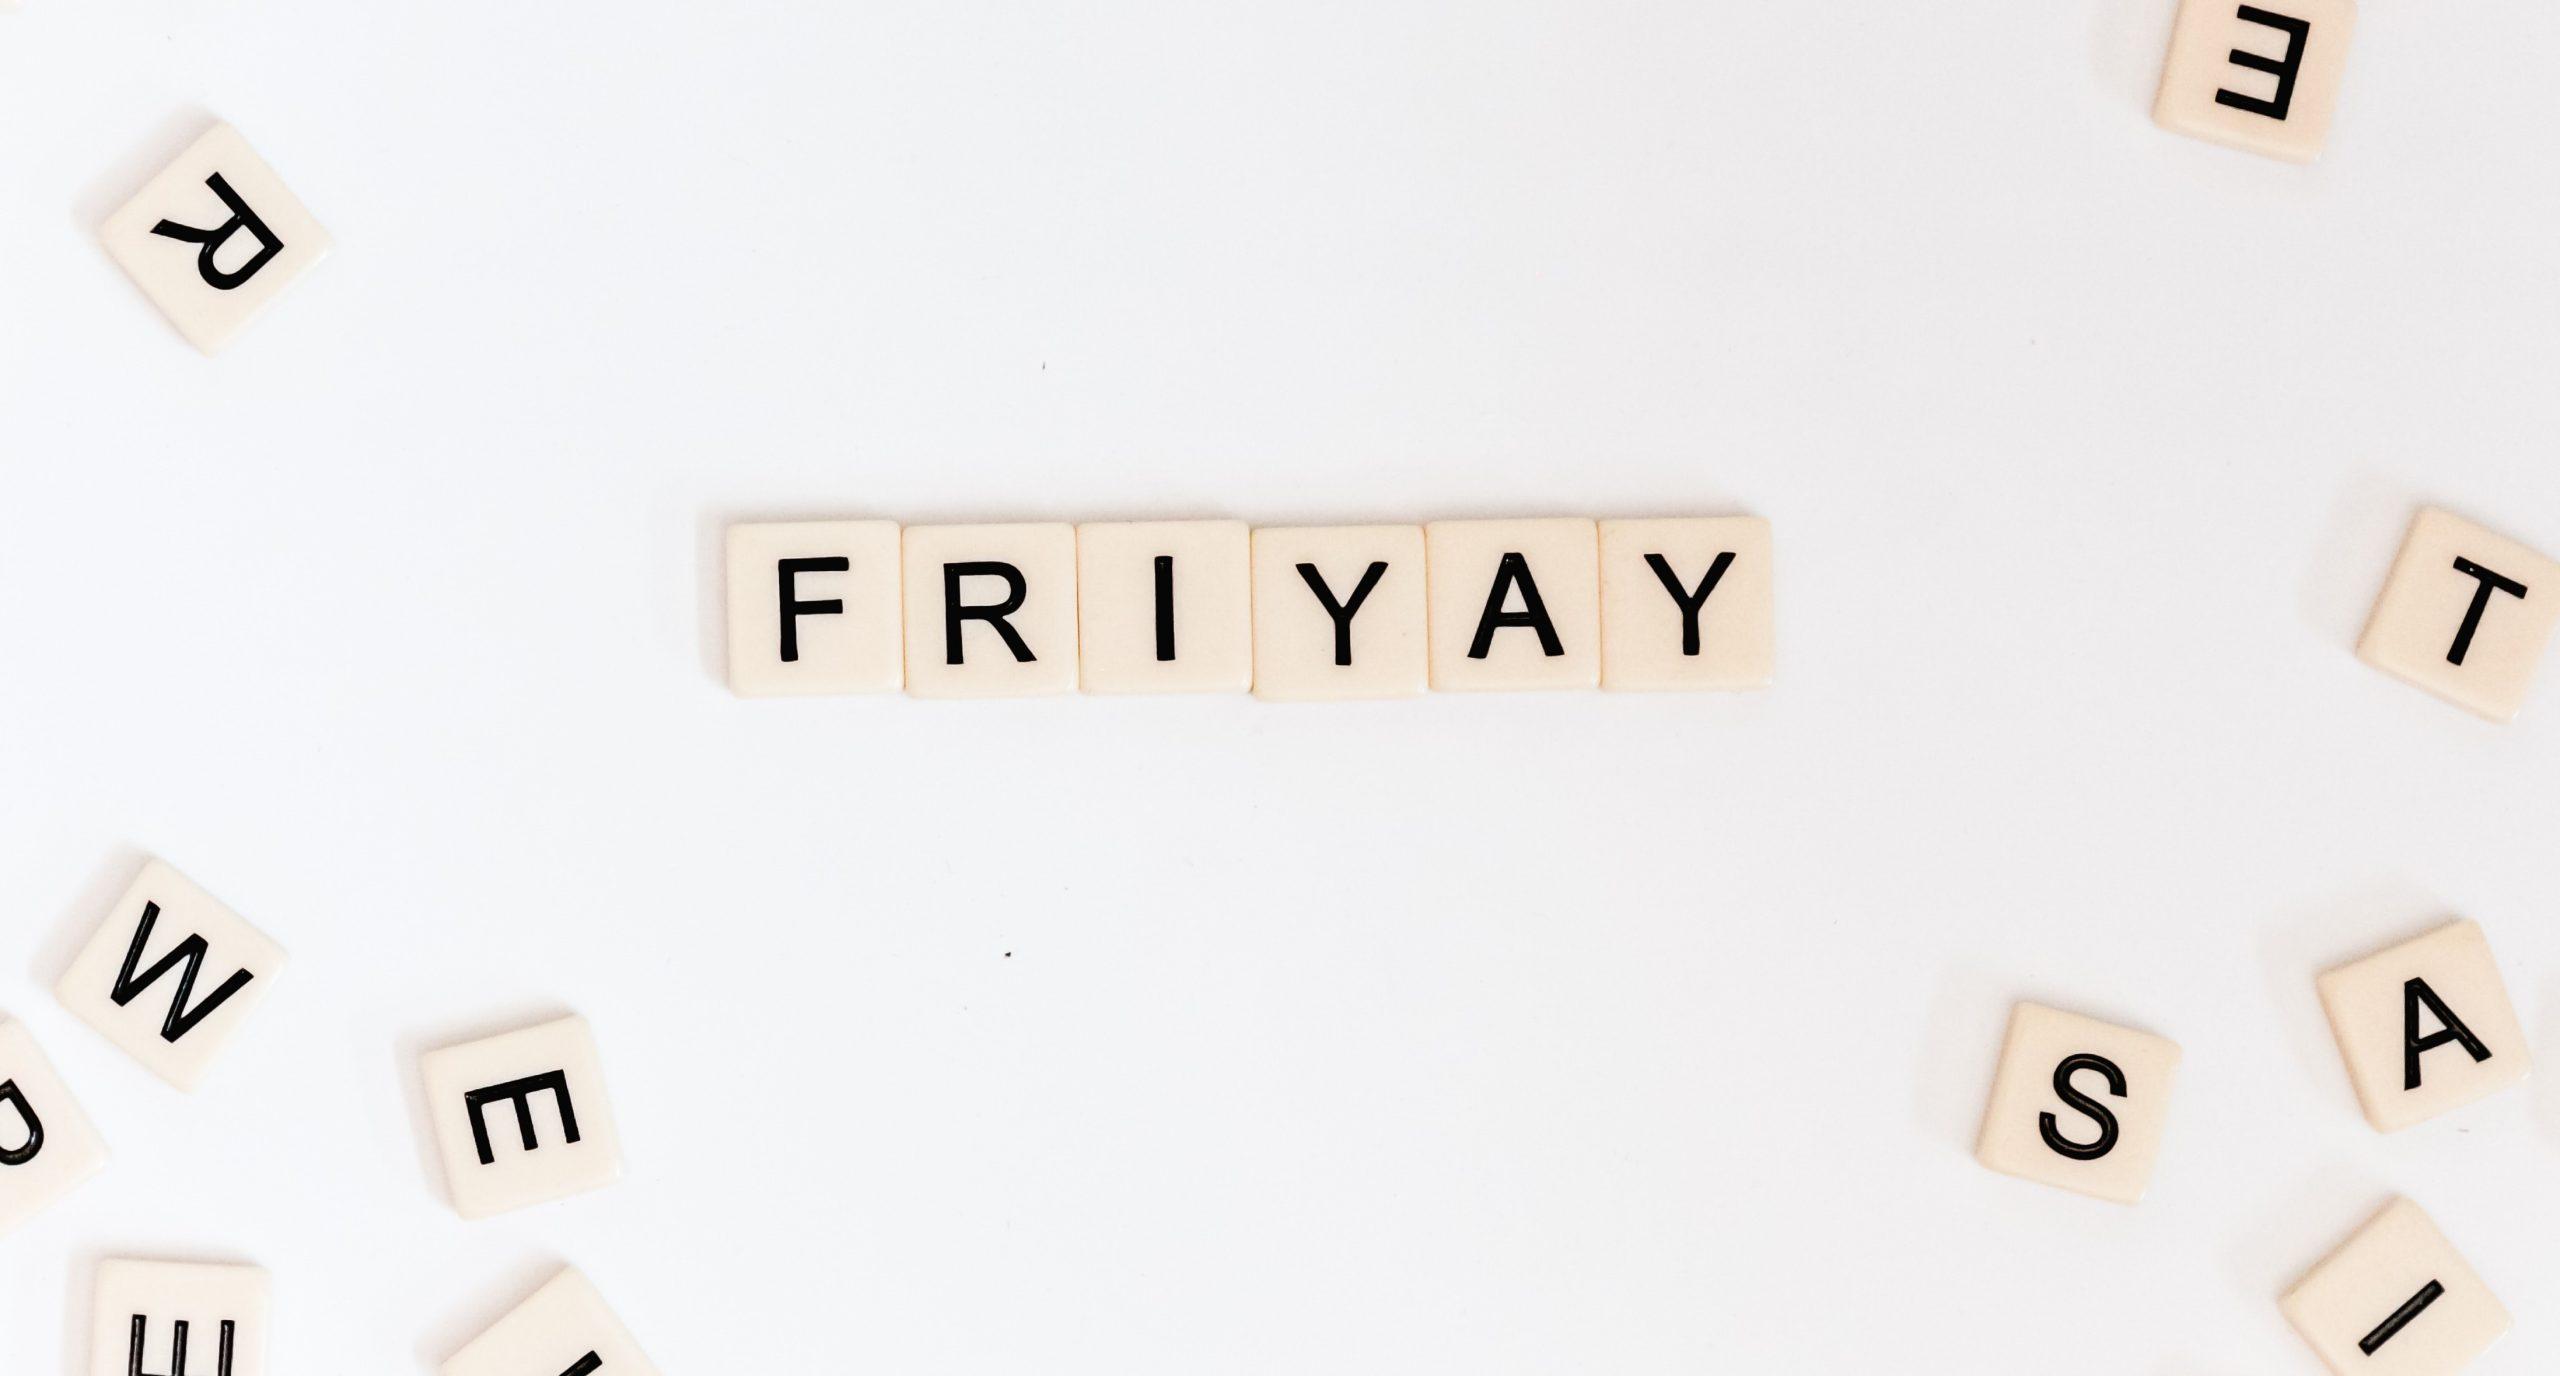 Scrabble letters spelling the word 'Friyay'.